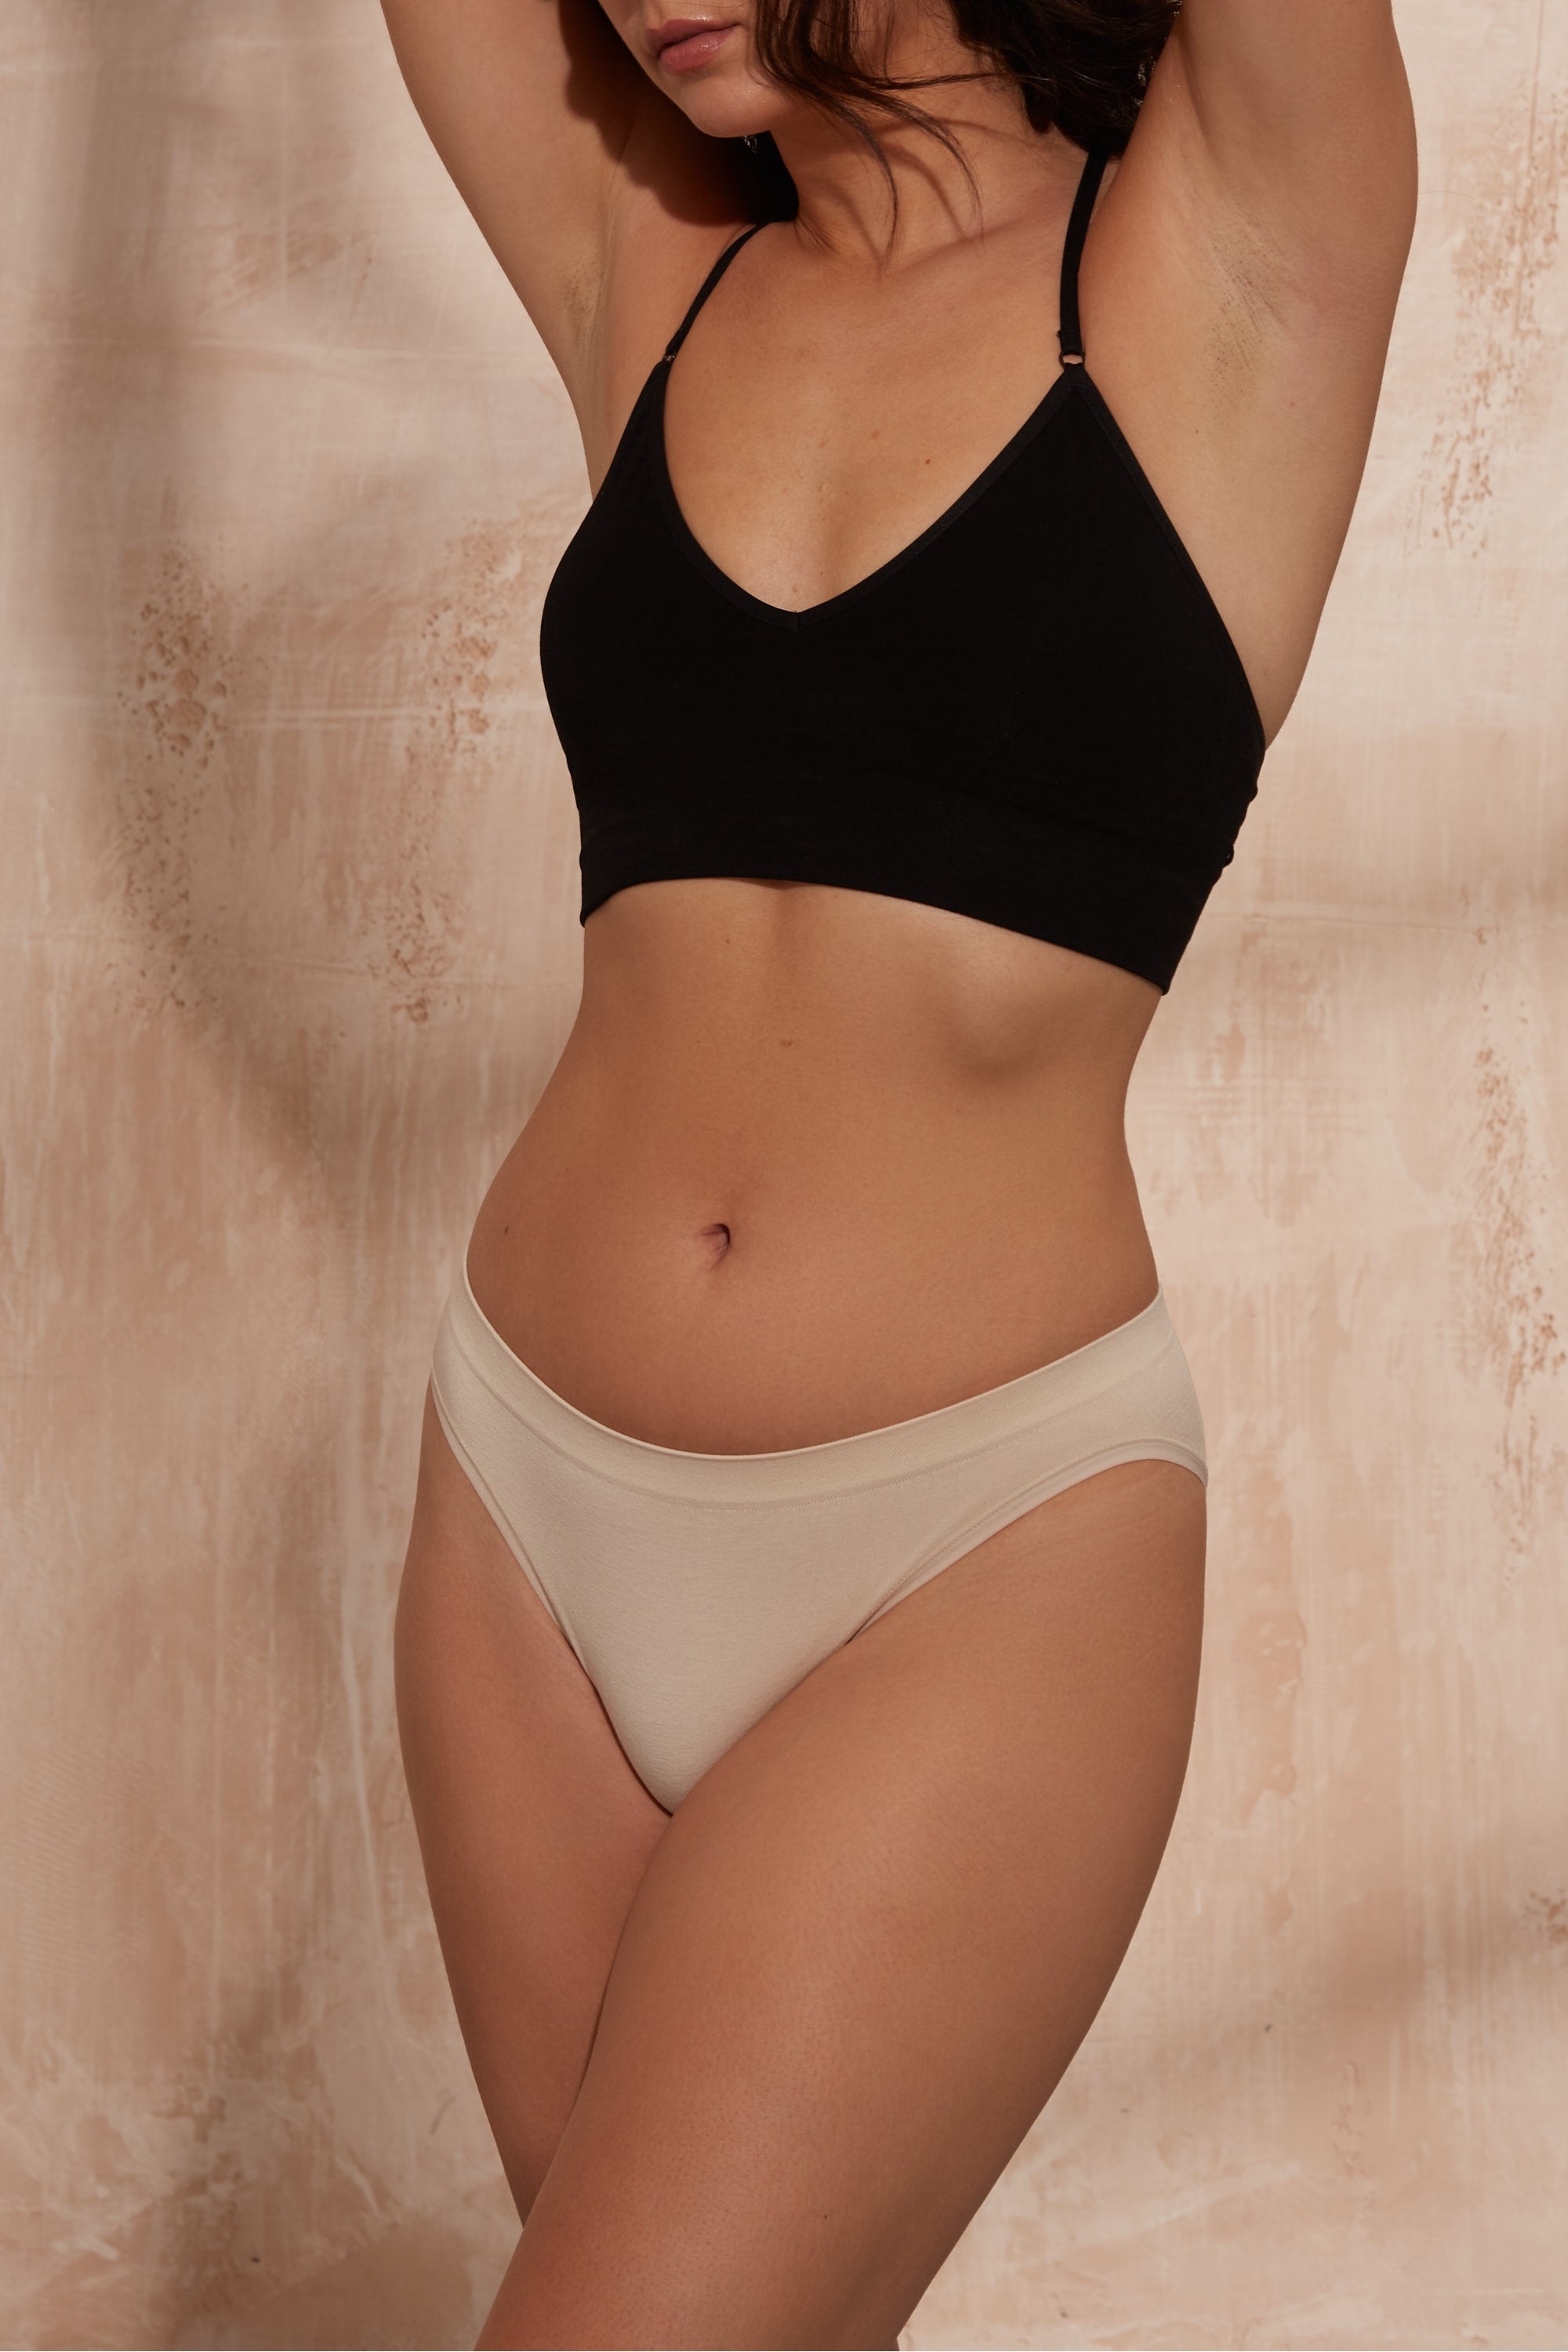 Model wearing black top and beige briefs for sustainable activewear brand, Jilla.